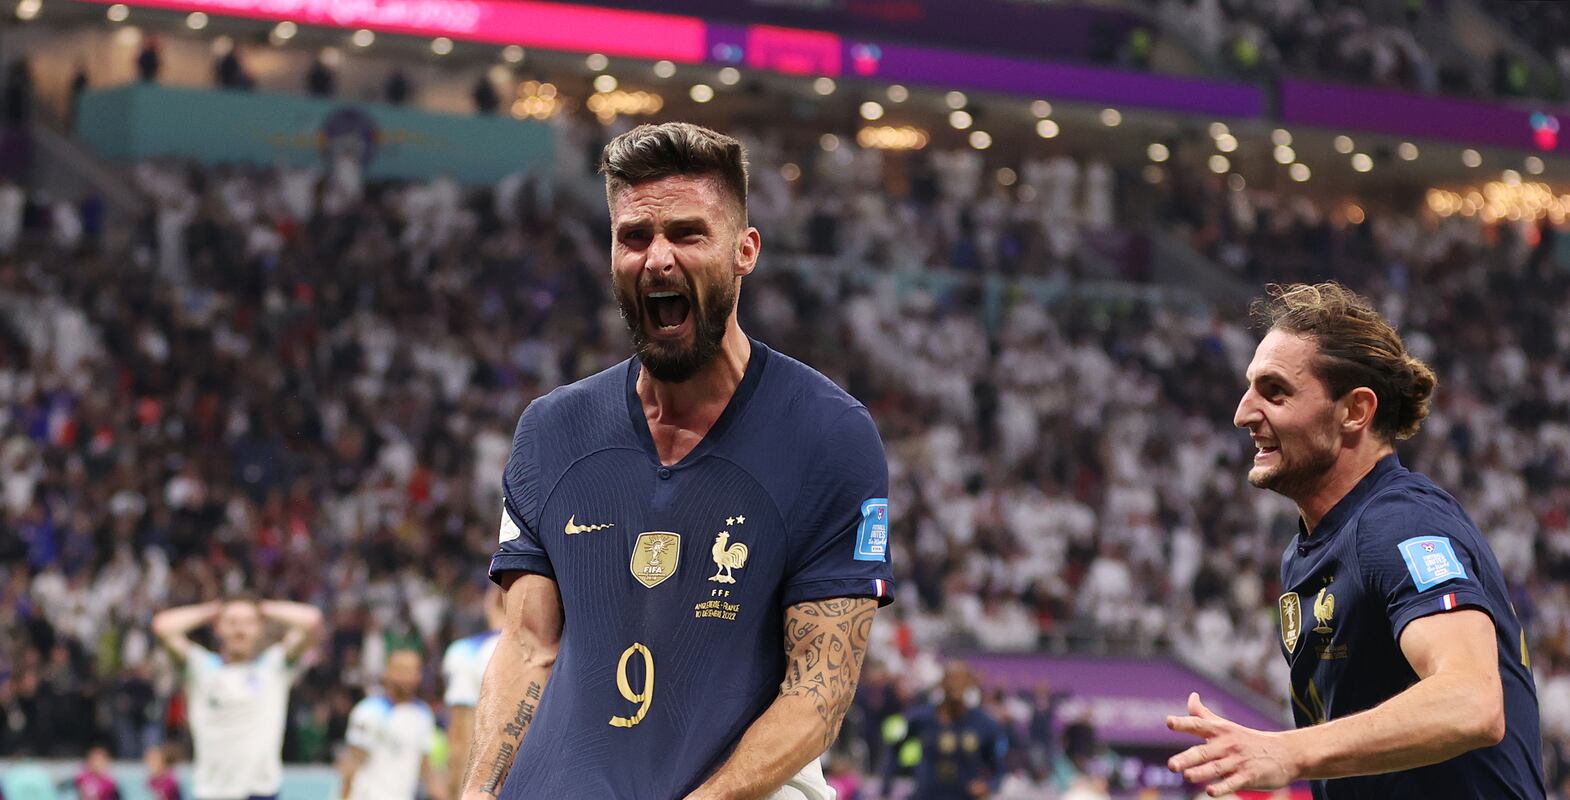 AL KHOR, QATAR - DECEMBER 10: Olivier Giroud of France celebrates after scoring the team's second goal during the FIFA World Cup Qatar 2022 quarter final match between England and France at Al Bayt Stadium on December 10, 2022 in Al Khor, Qatar. (Photo by Catherine Ivill / Getty Images)